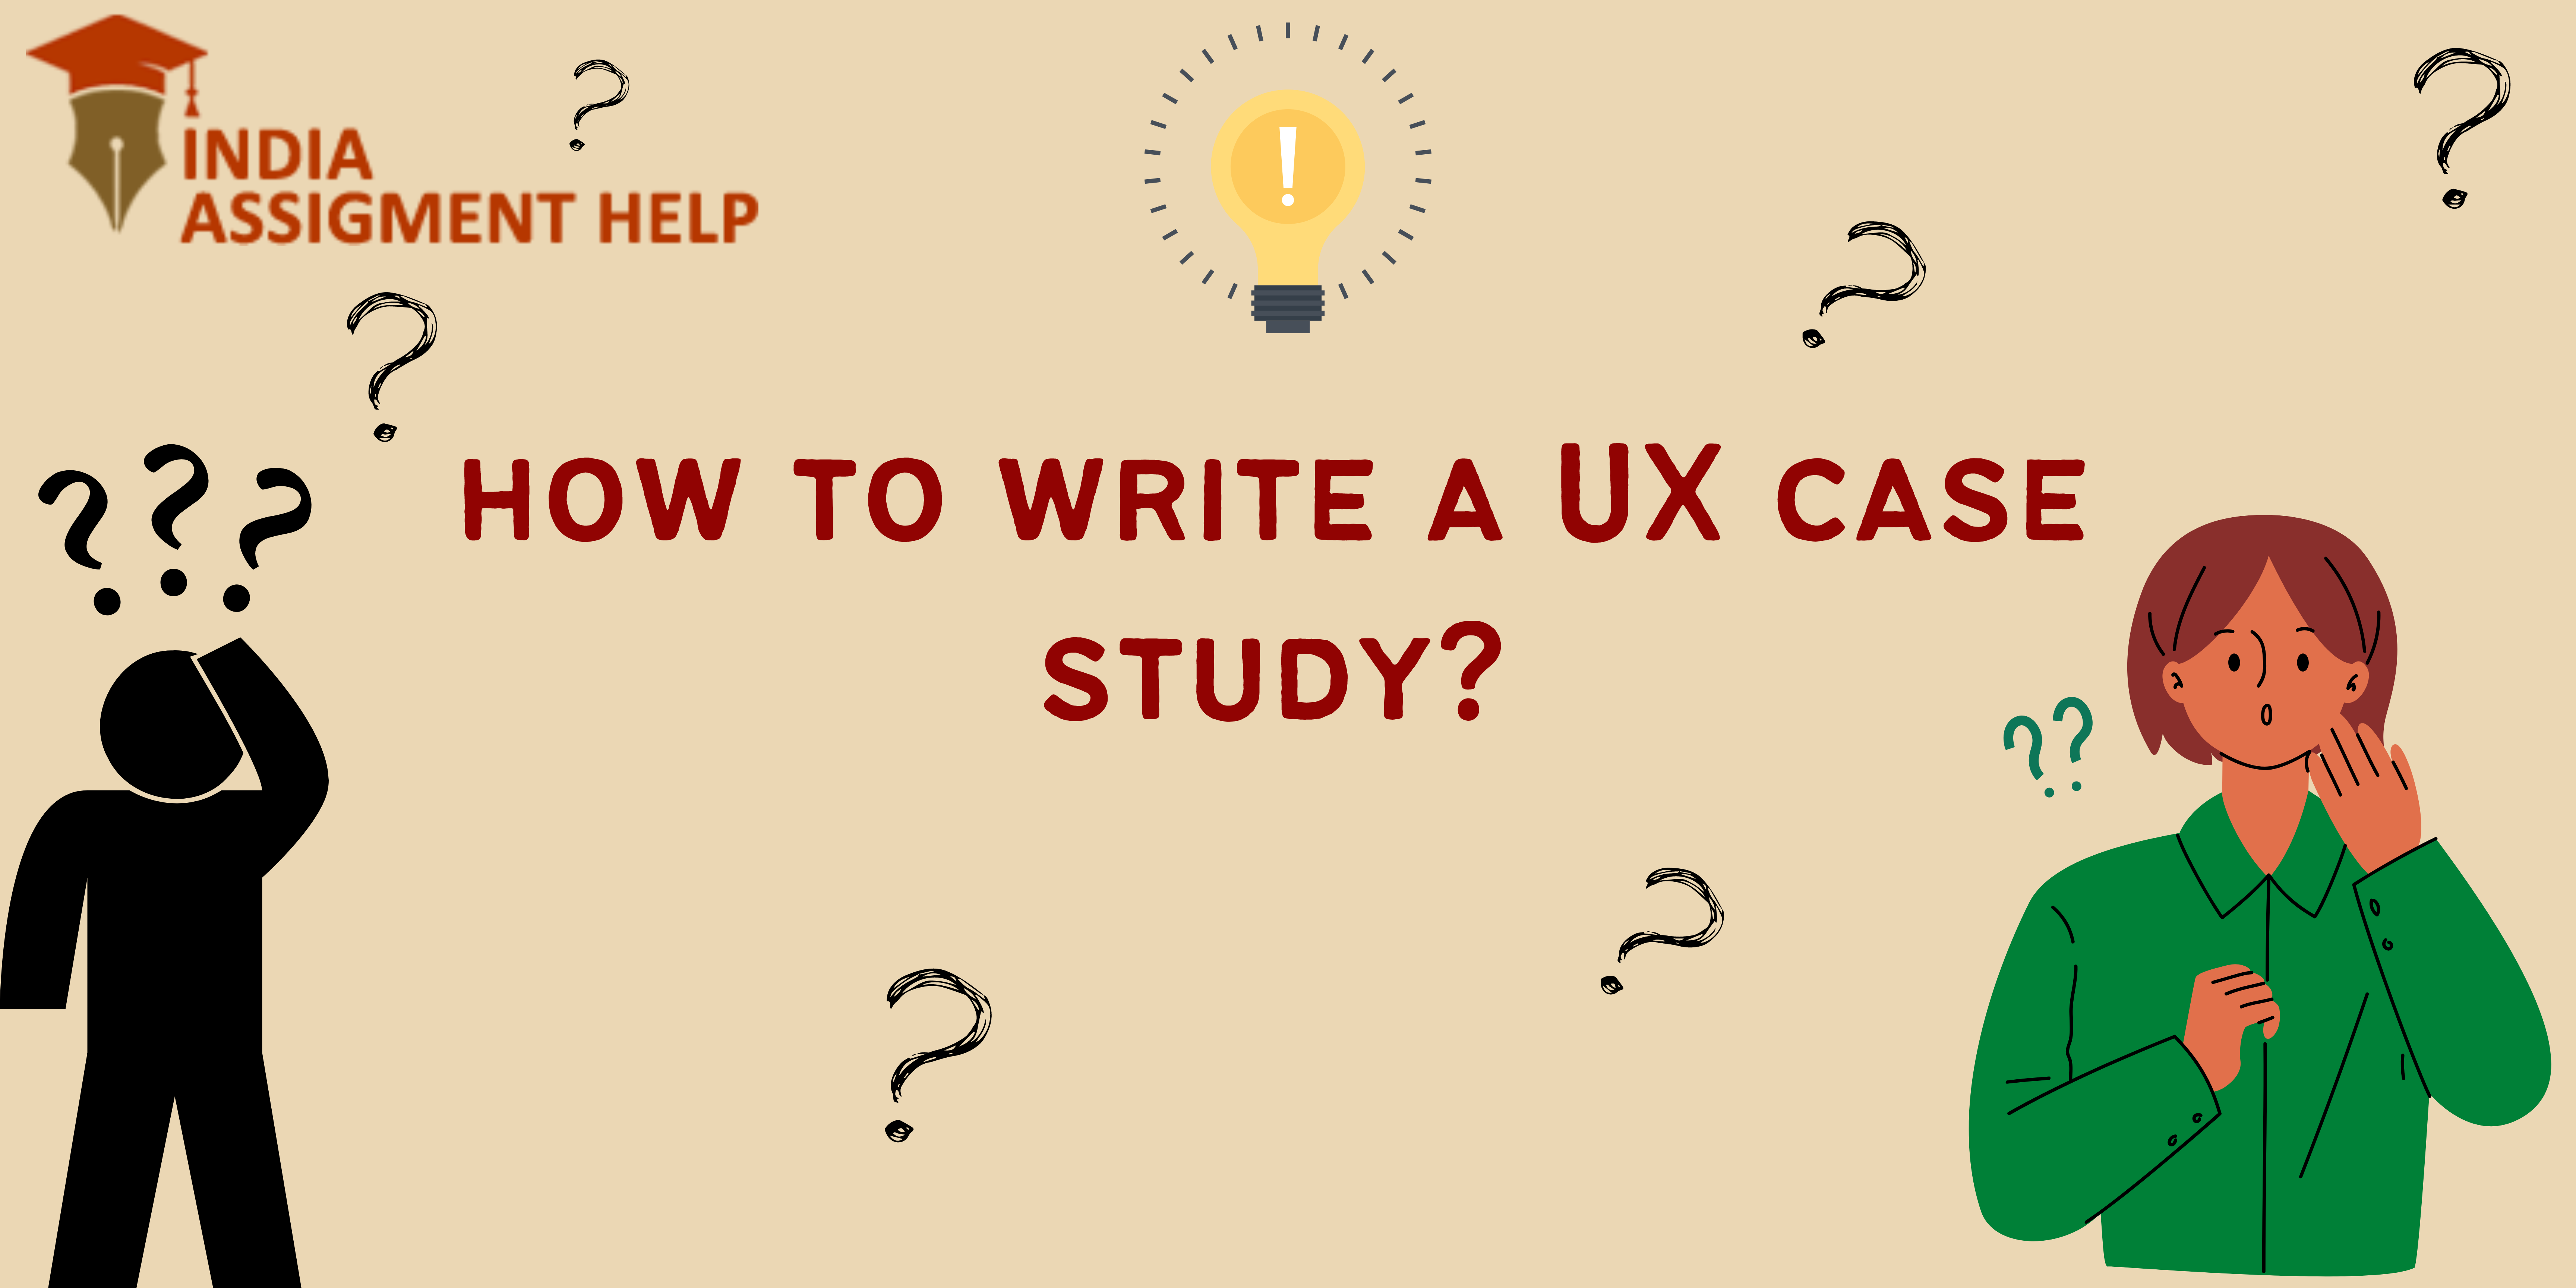 How to Write a UX Case Study